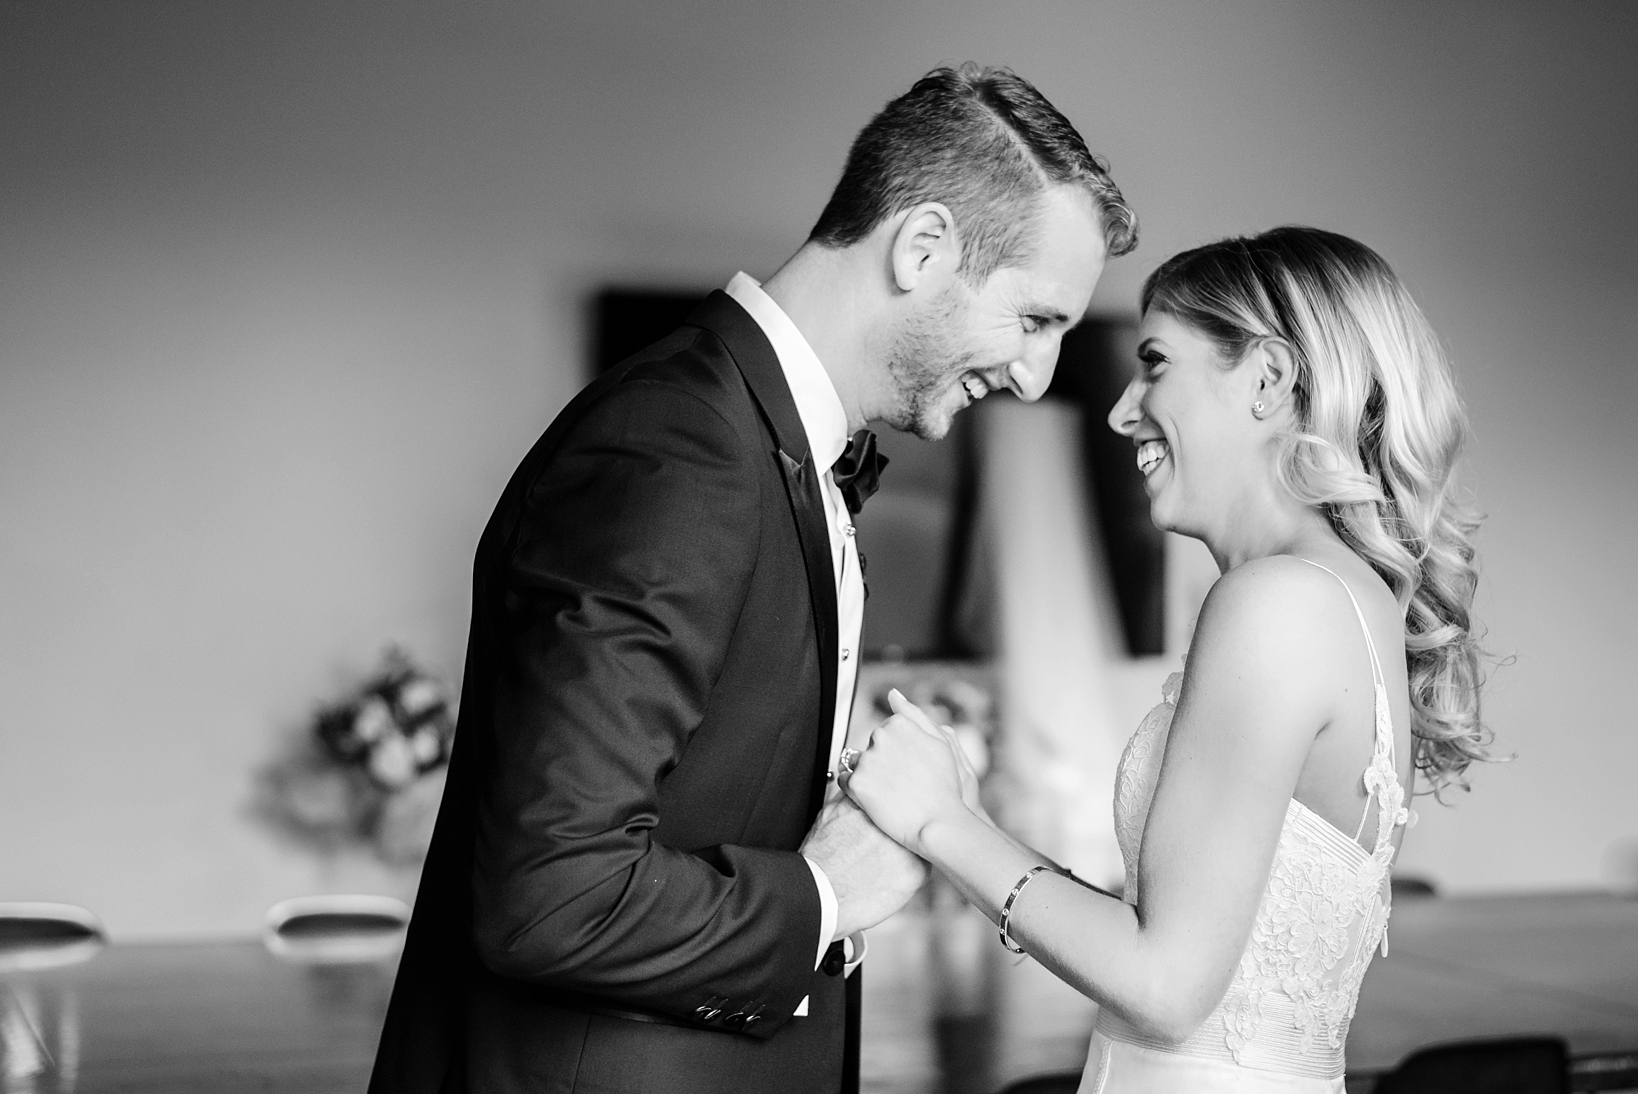 Bride and Groom share a moment as they see each other for the first time on their wedding day